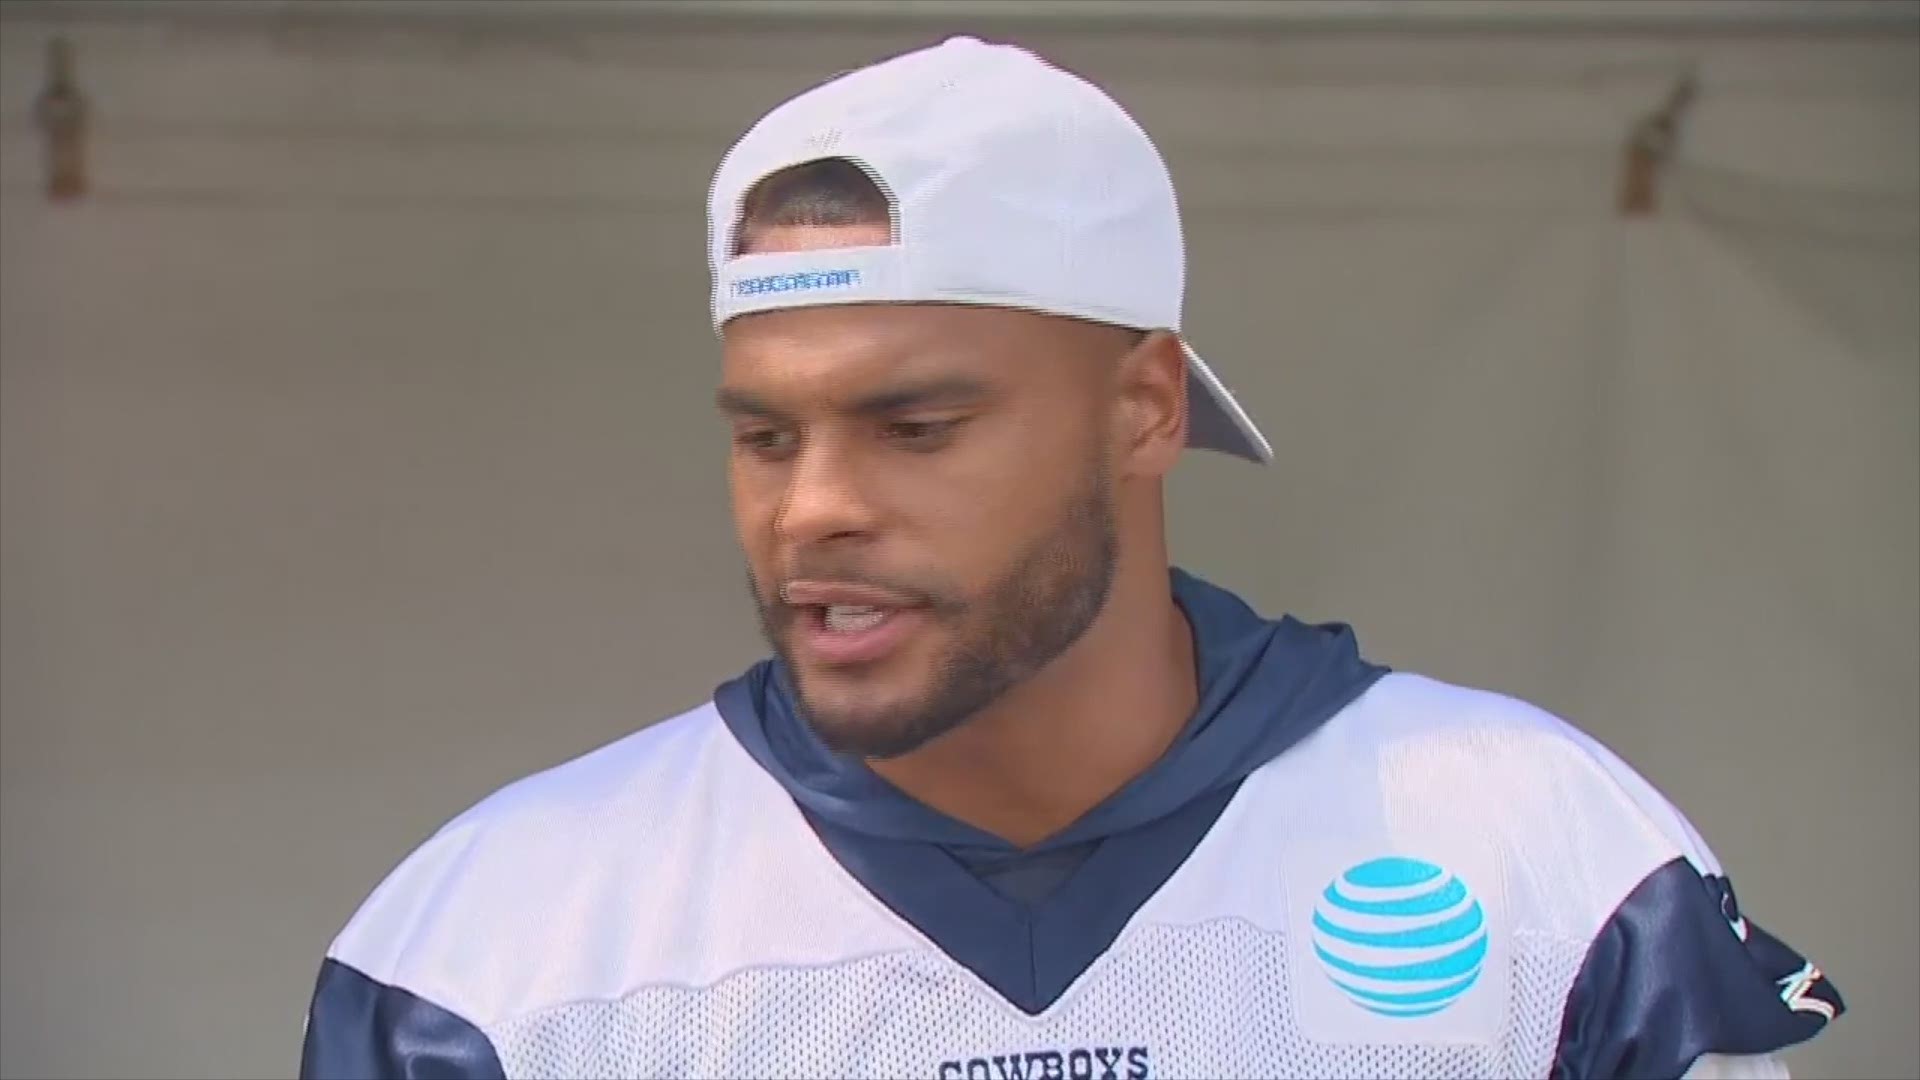 Dak Prescott delivered his strongest words to date on the national anthem issue in the NFL. WFAA Sports